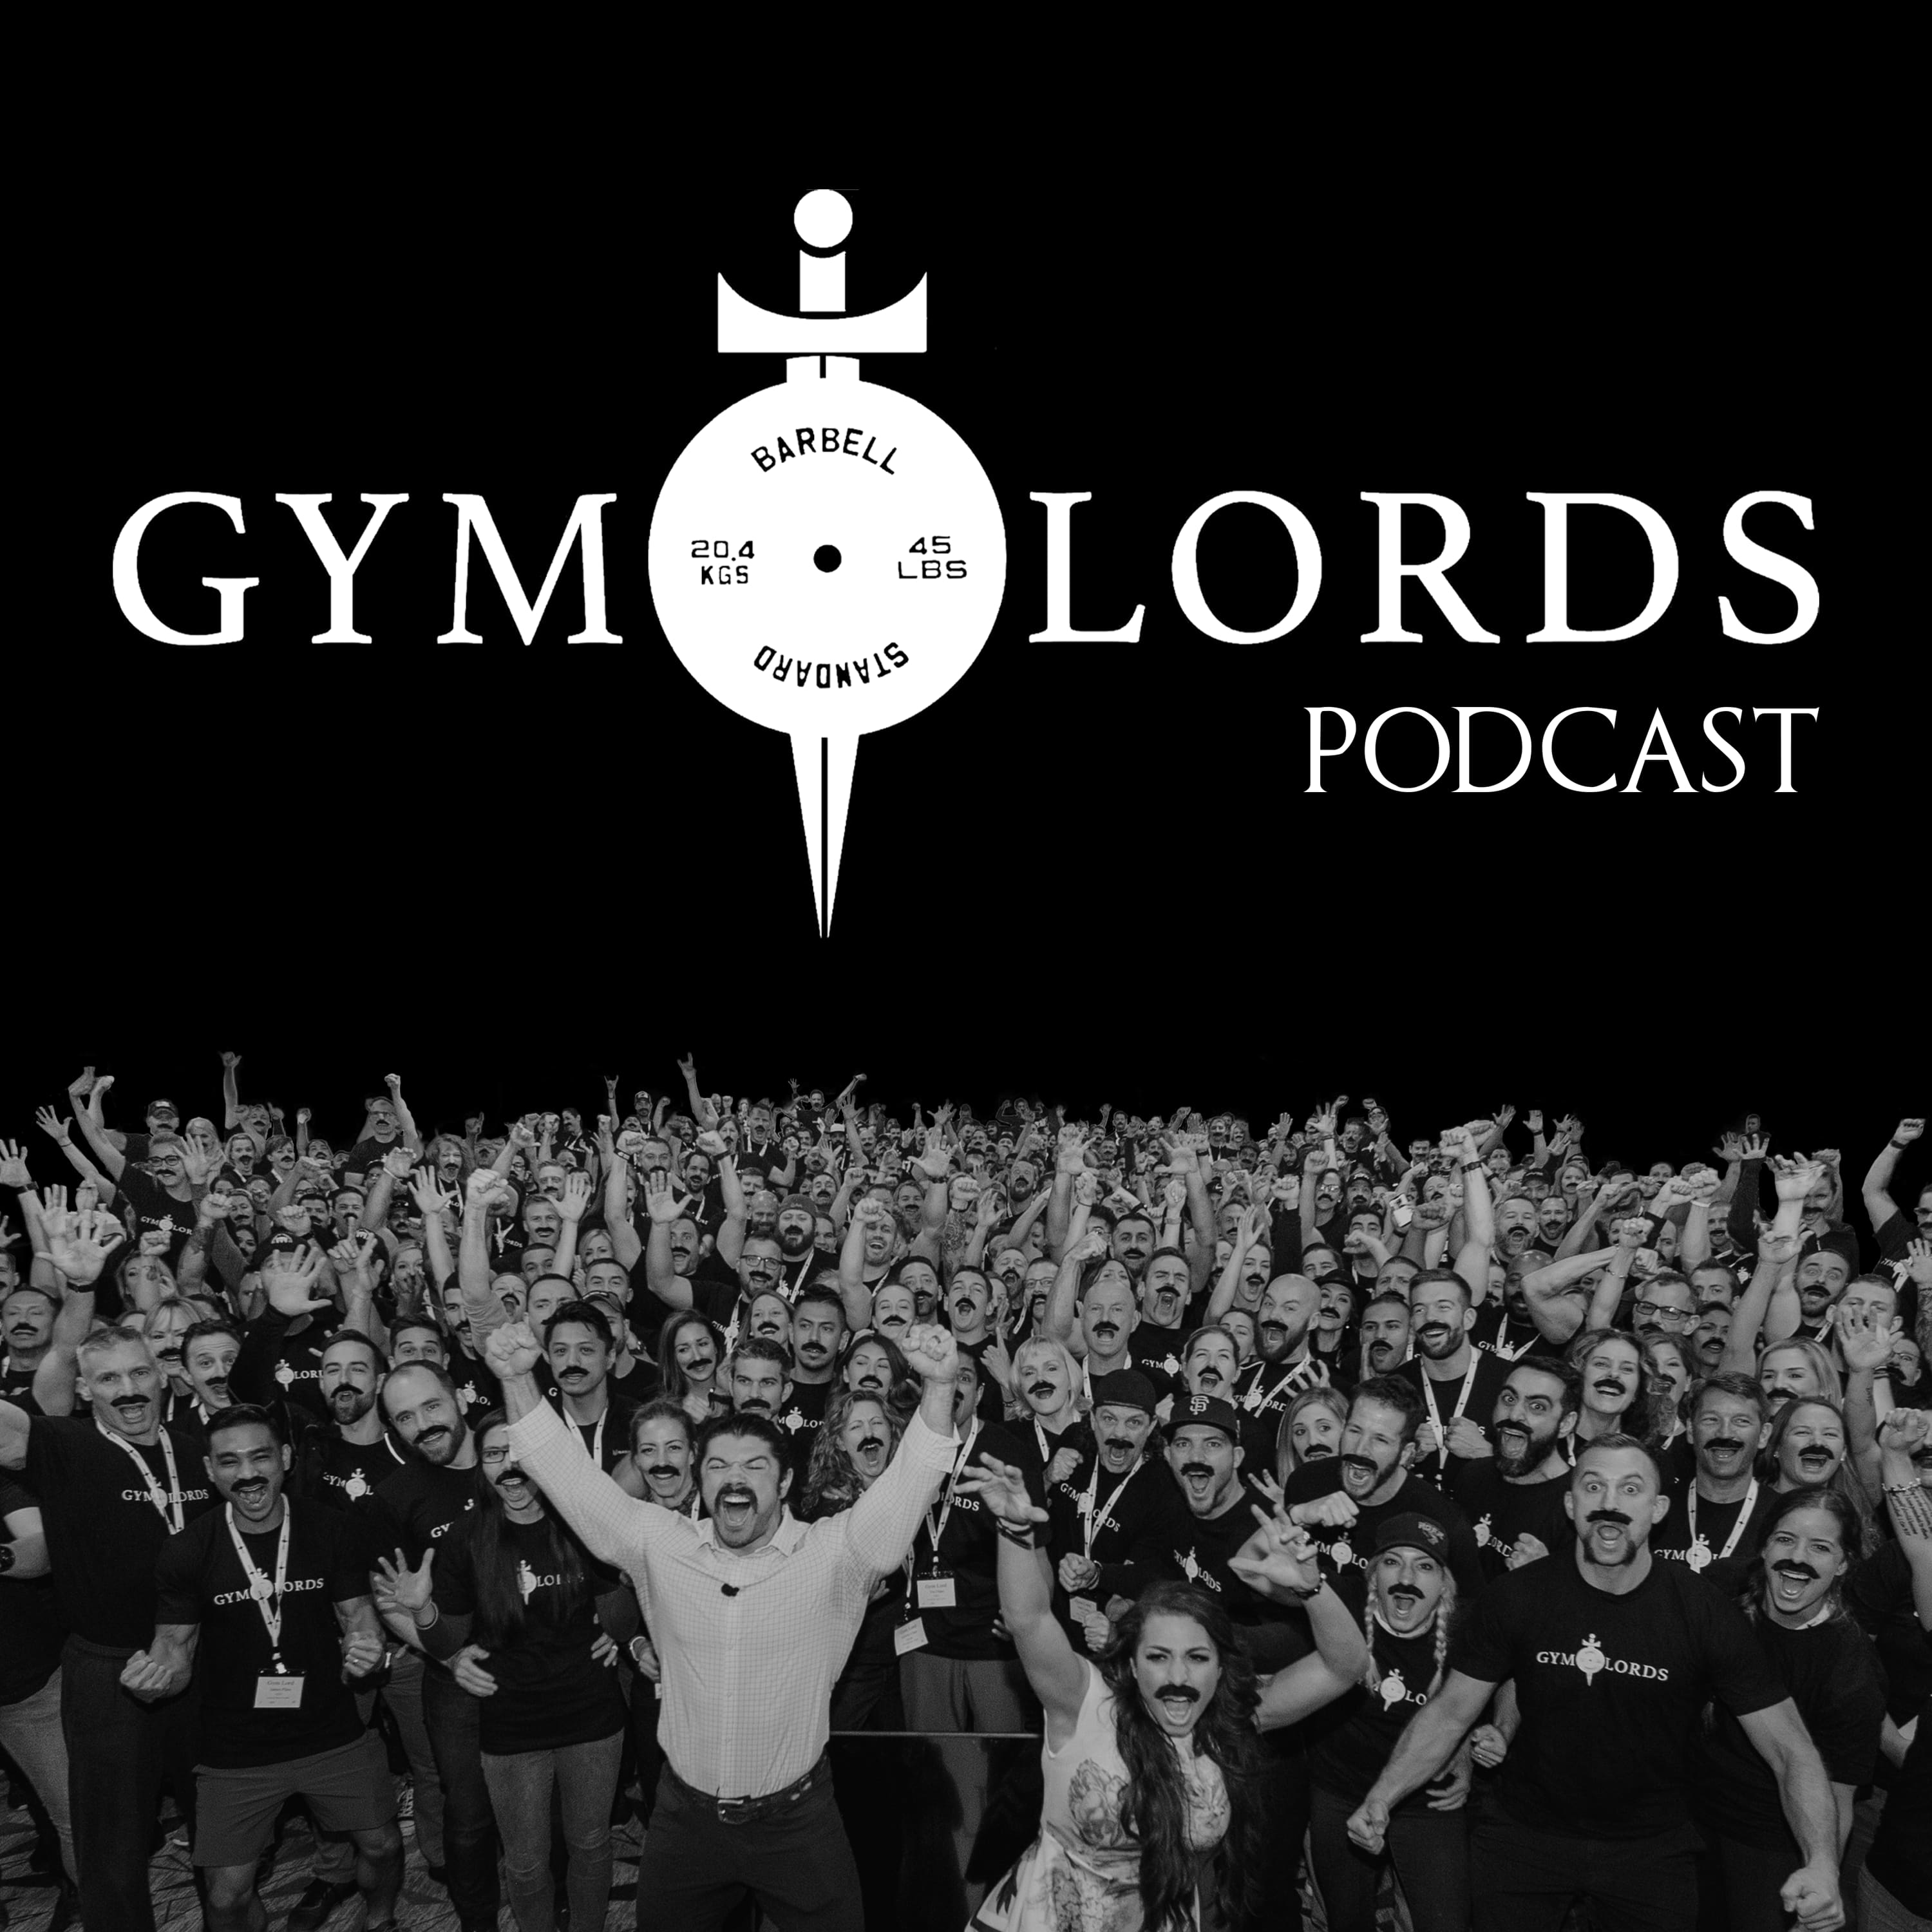 Artwork for podcast The Gym Lords Podcast